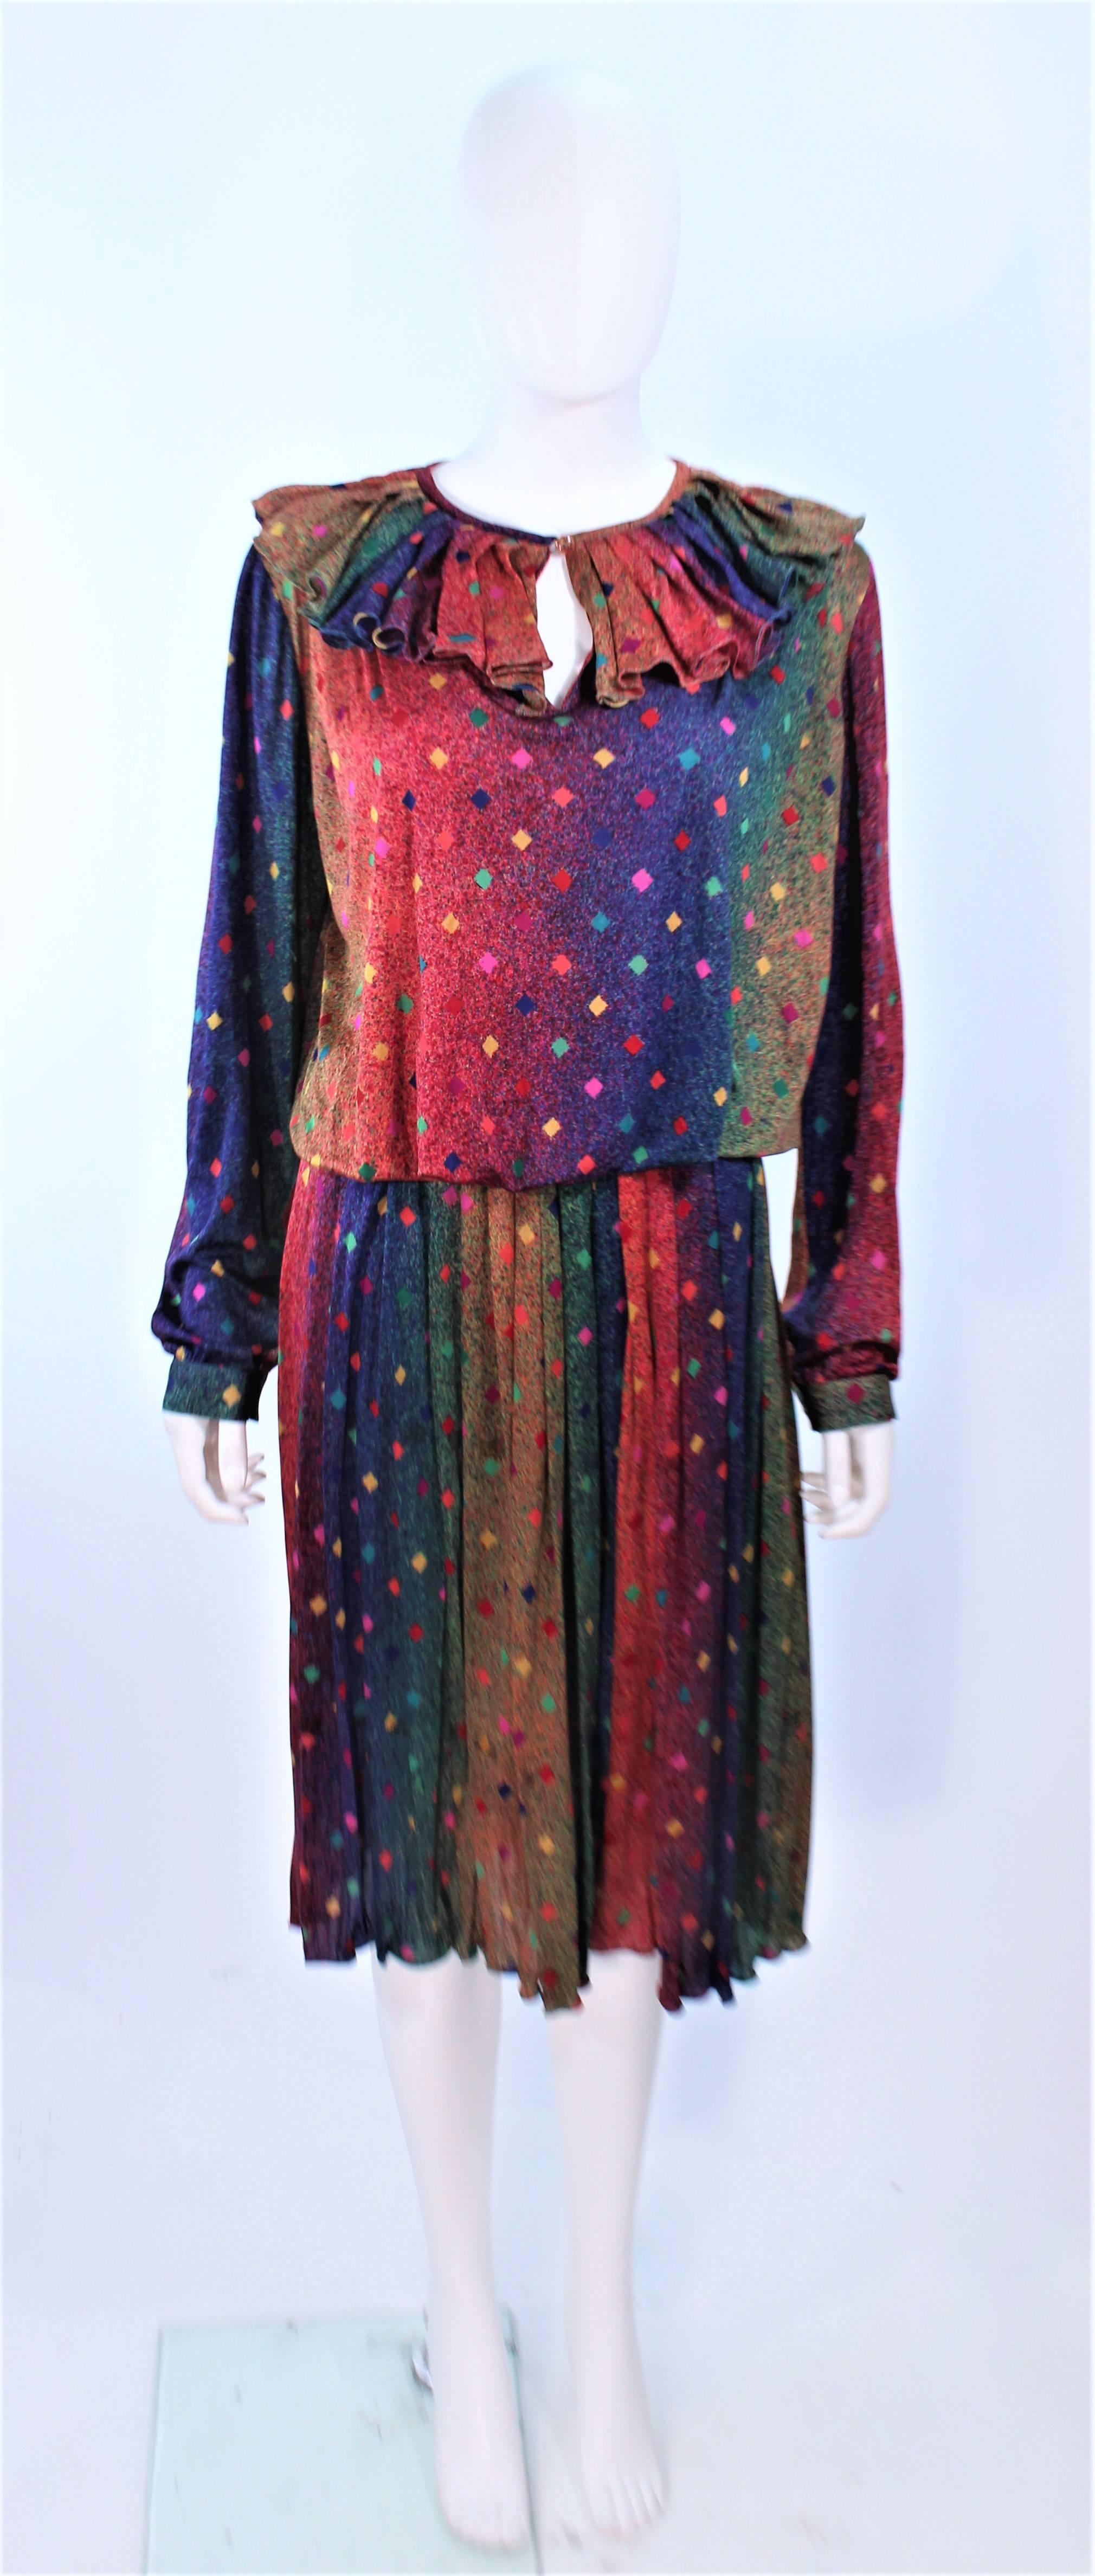 This Missoni design is composed of a rainbow patterned silk with a ruffle collar. The skirt has a pleated style with an elastic waist. In excellent vintage condition.

**Please cross-reference measurements for personal accuracy. Size in